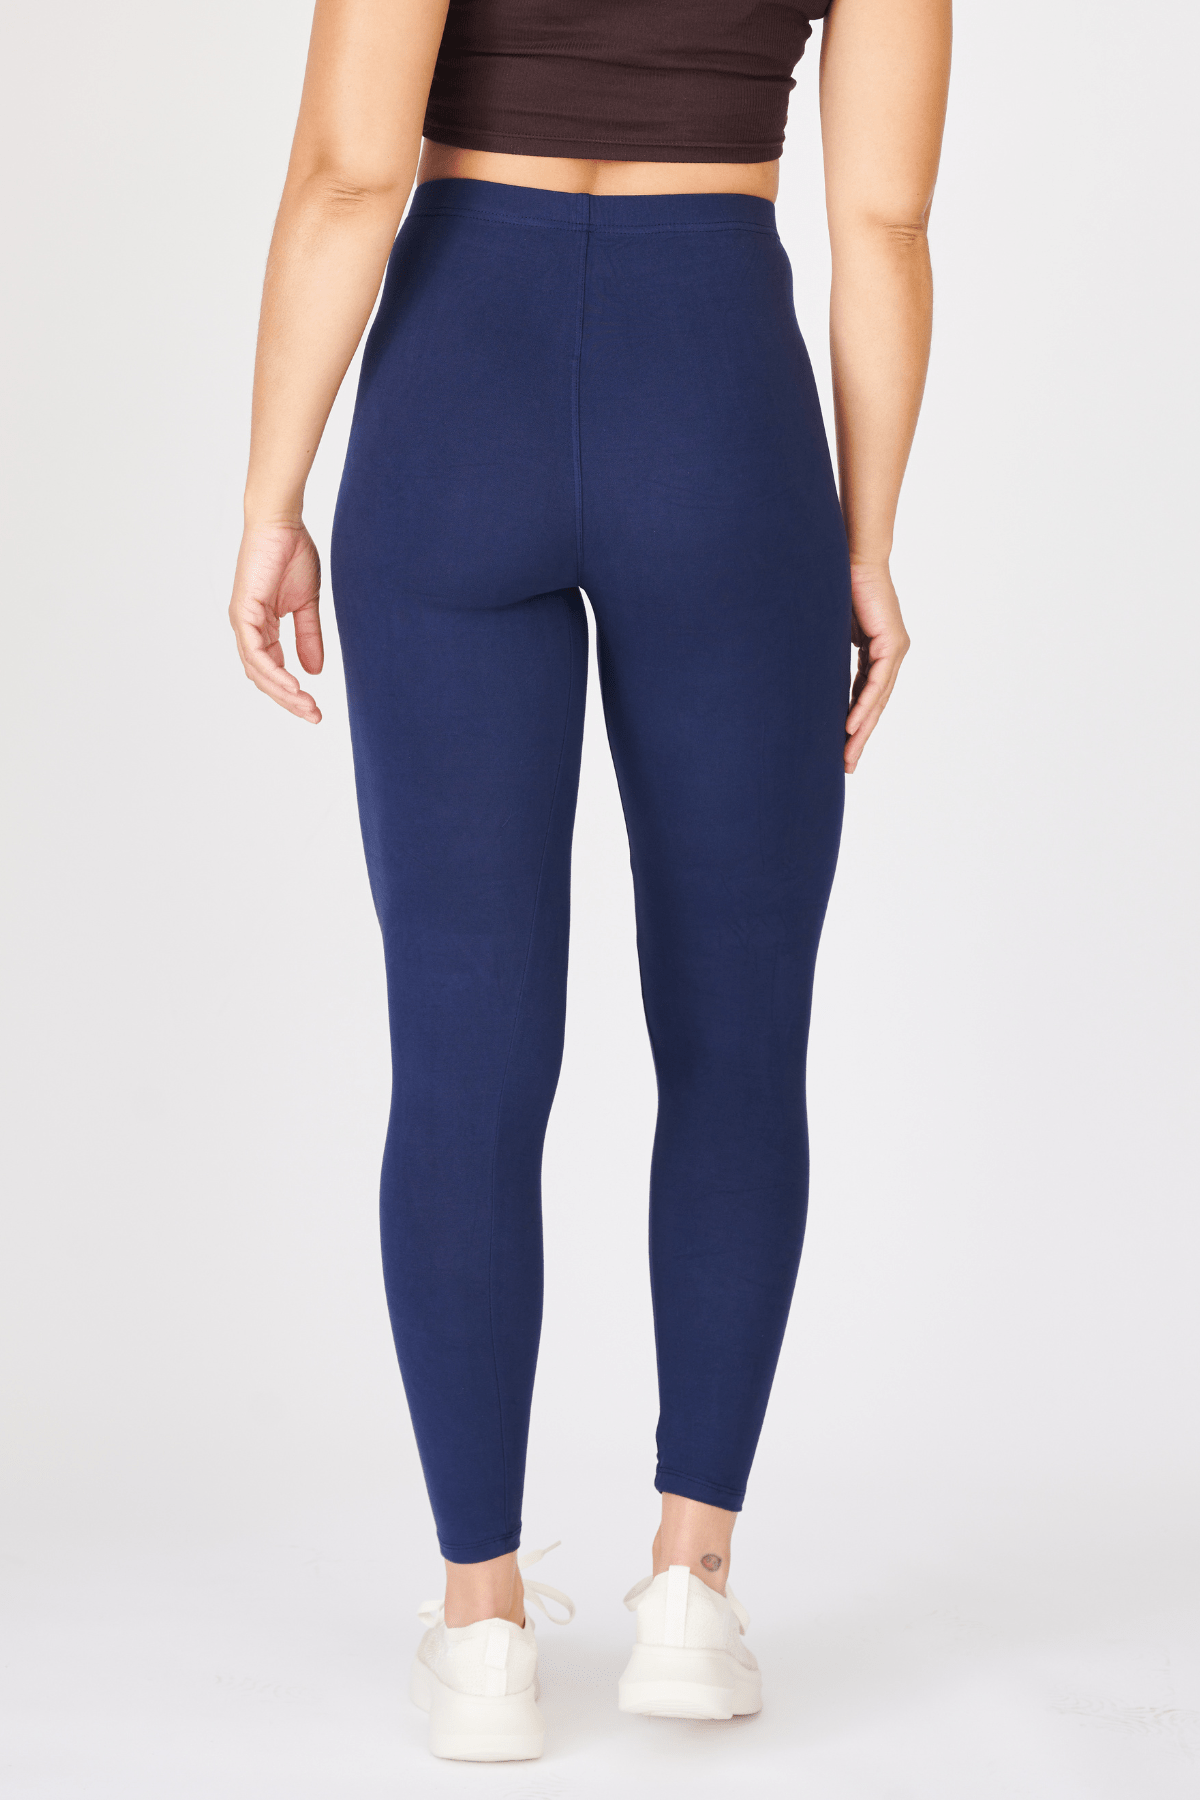 oolala Leggings OS (Fits 2-12) / Navy Solid#color_navy